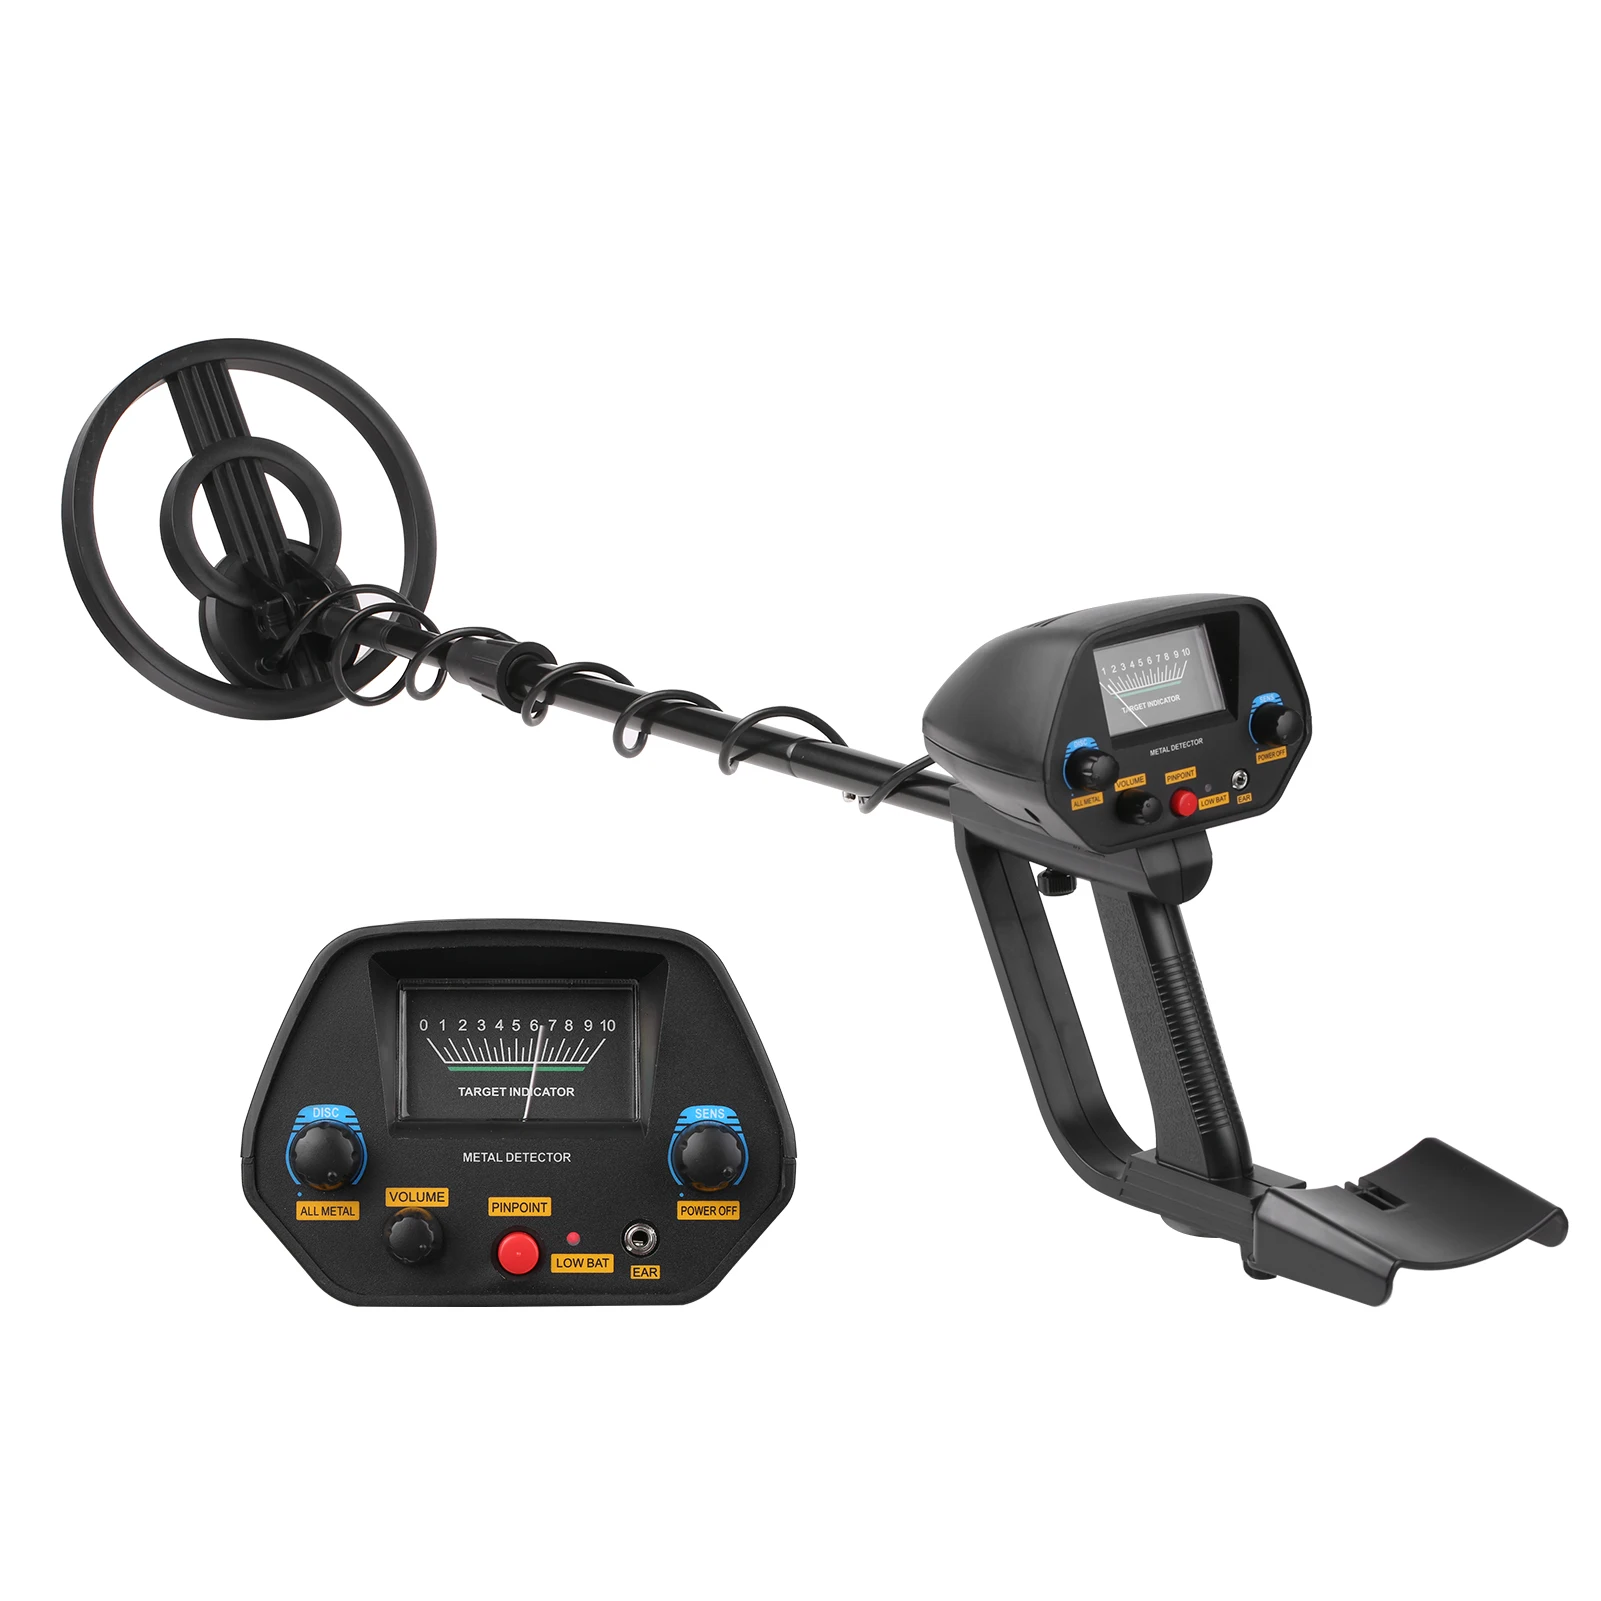 

MD-4080 Metal Detector Adjustable Waterproof Metal Finder 31-41in with DISC and Pinpoint Modes Audio Prompt for Adults